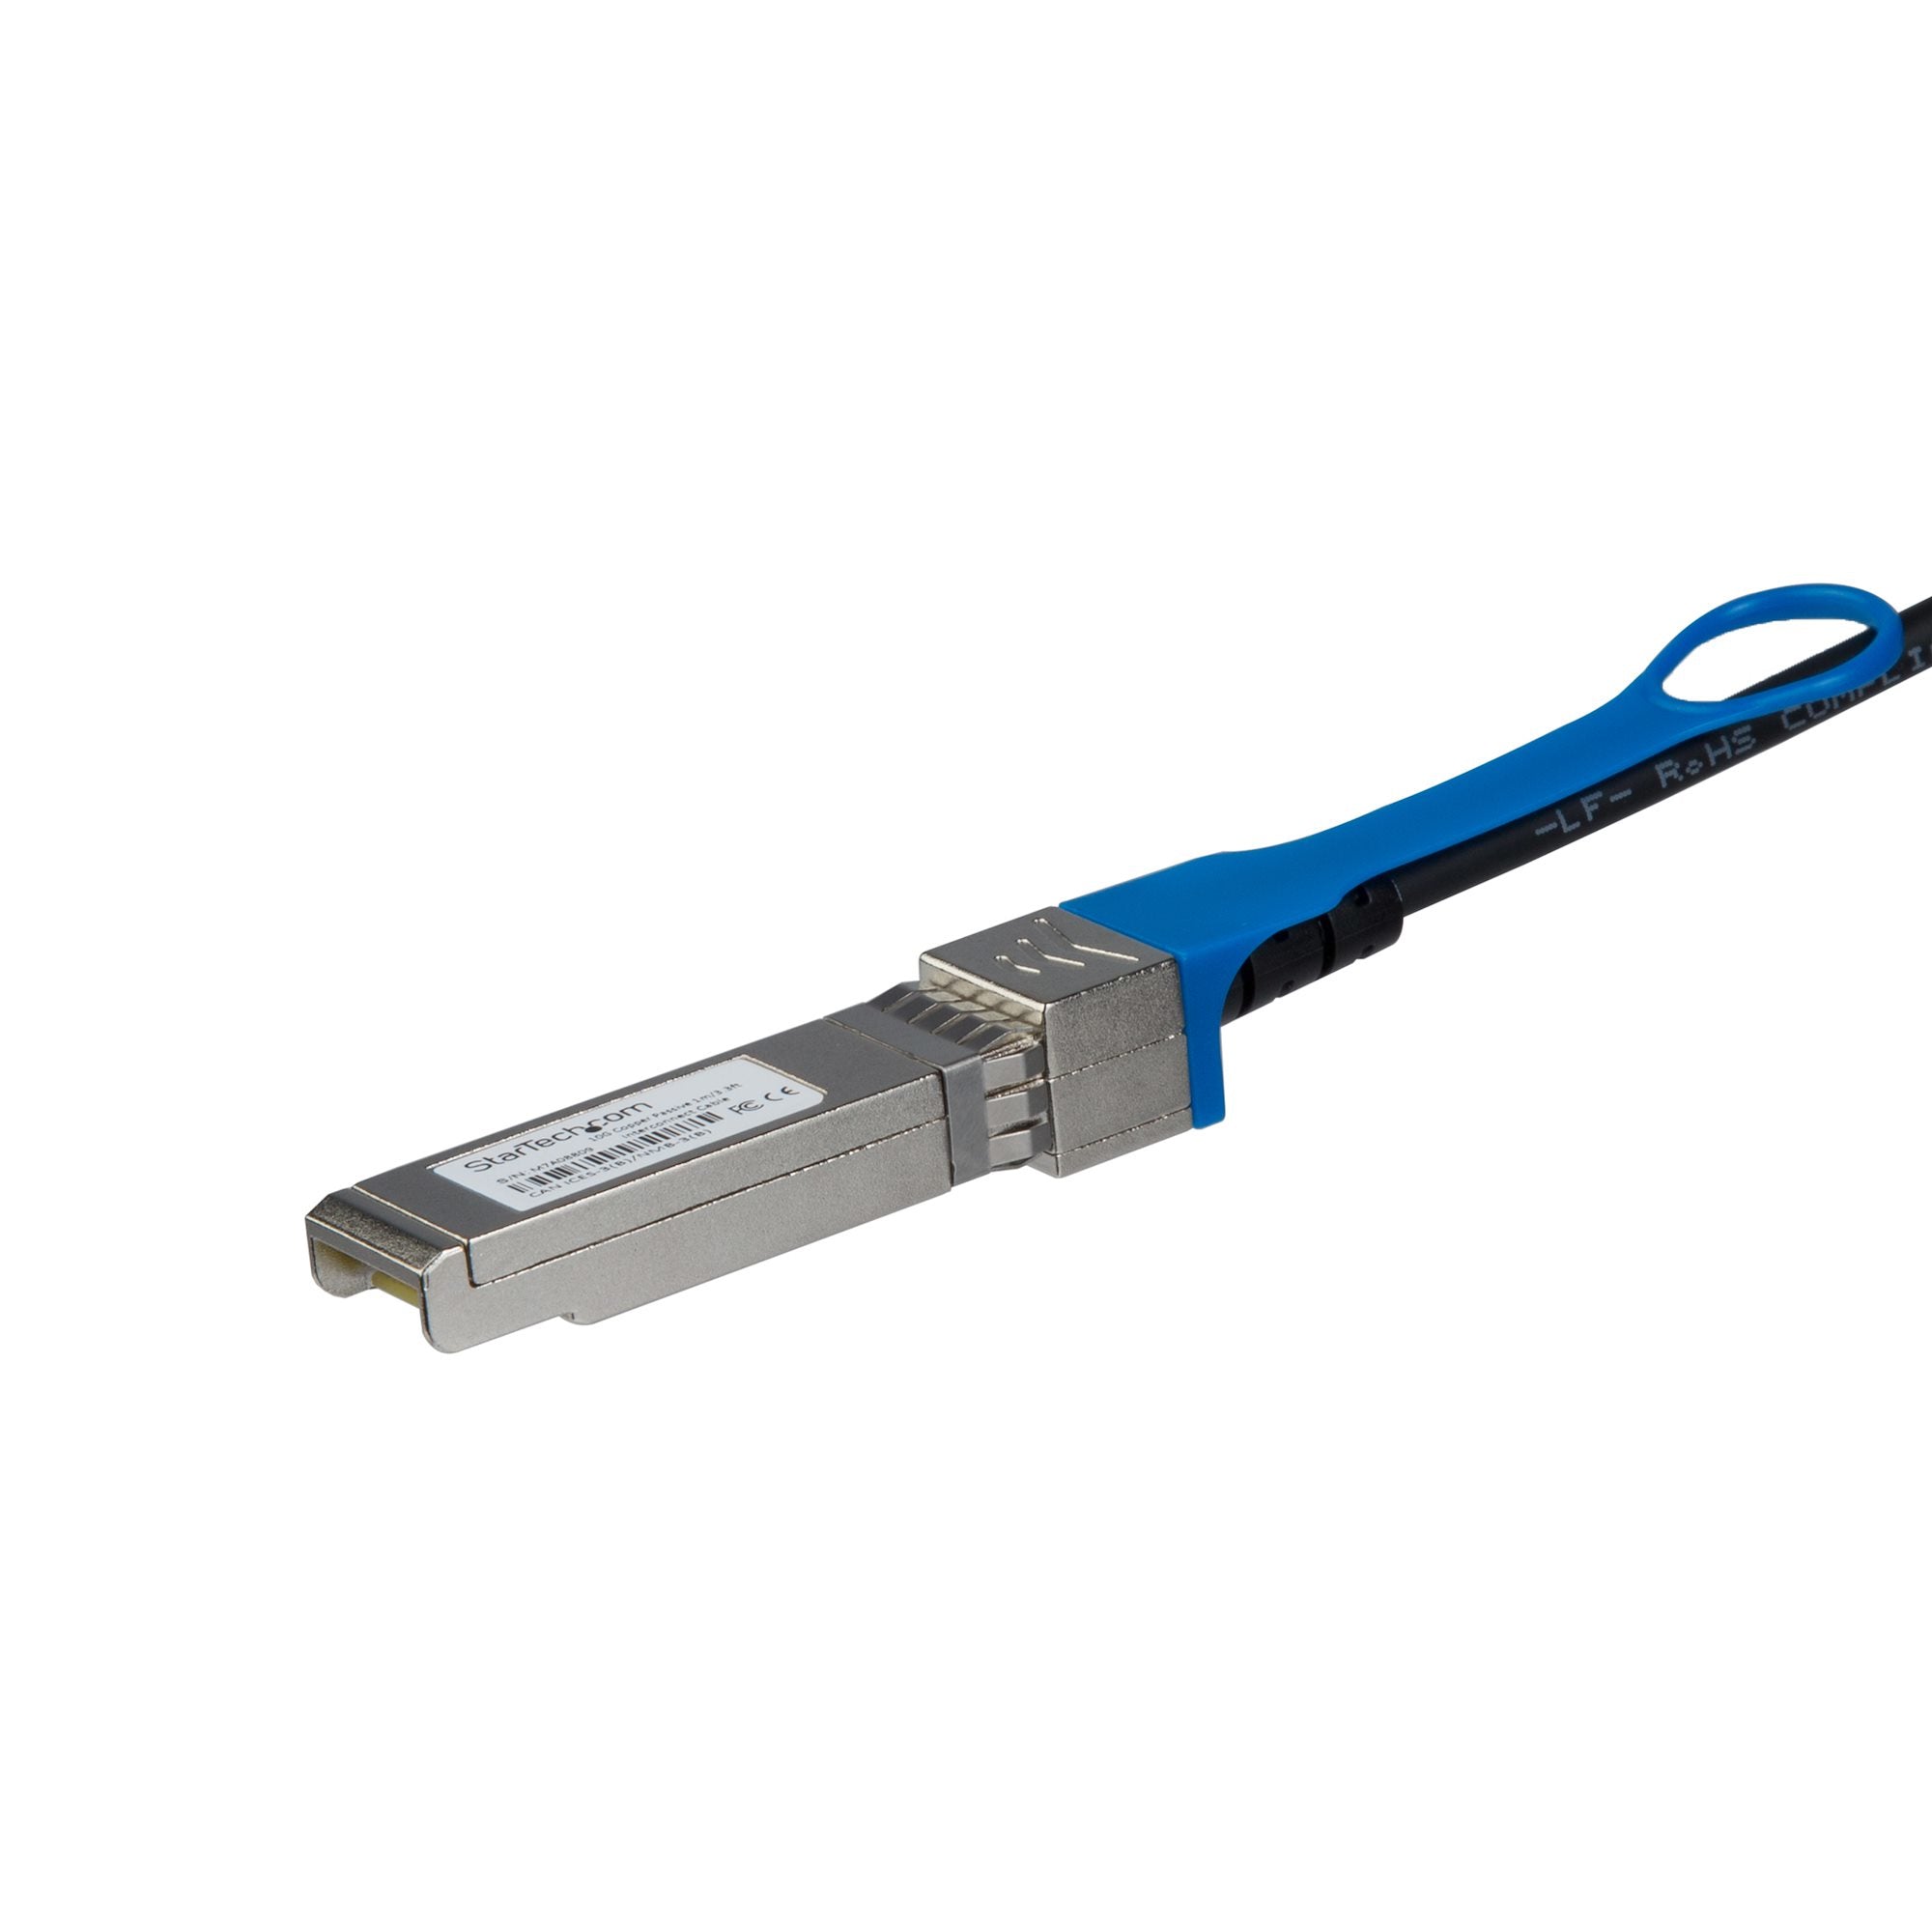 StarTech.com Cisco SFP-H10GB-ACU10M Compatible 10m 10G SFP+ to SFP+ Direct Attach Cable Twinax - 10GbE SFP+ Copper DAC 10 Gbps Low Power Active Mini GBIC/Transceiver Module DAC Firepower ASR9000 ASR1000